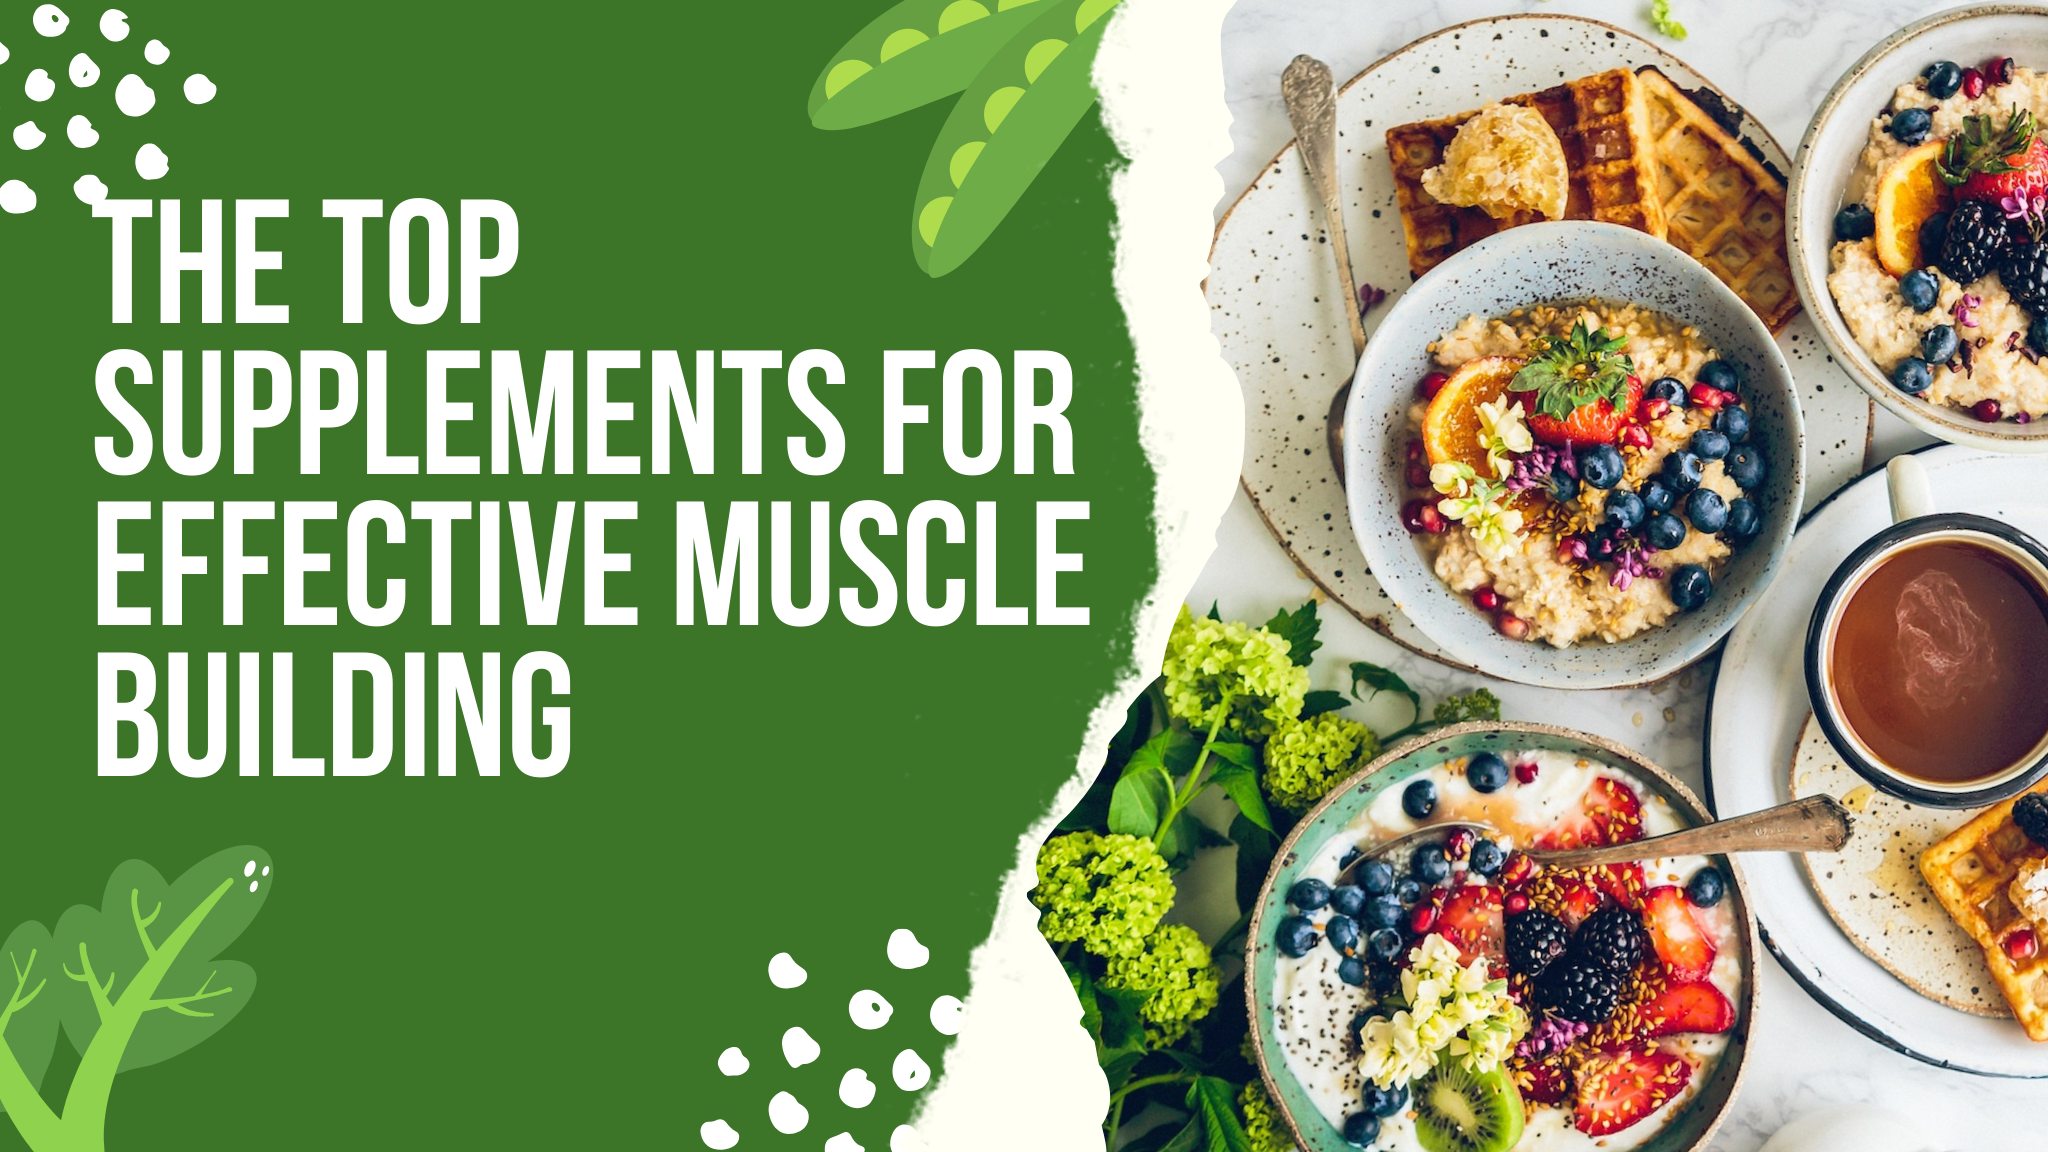 The Top Supplements for Effective Muscle Building